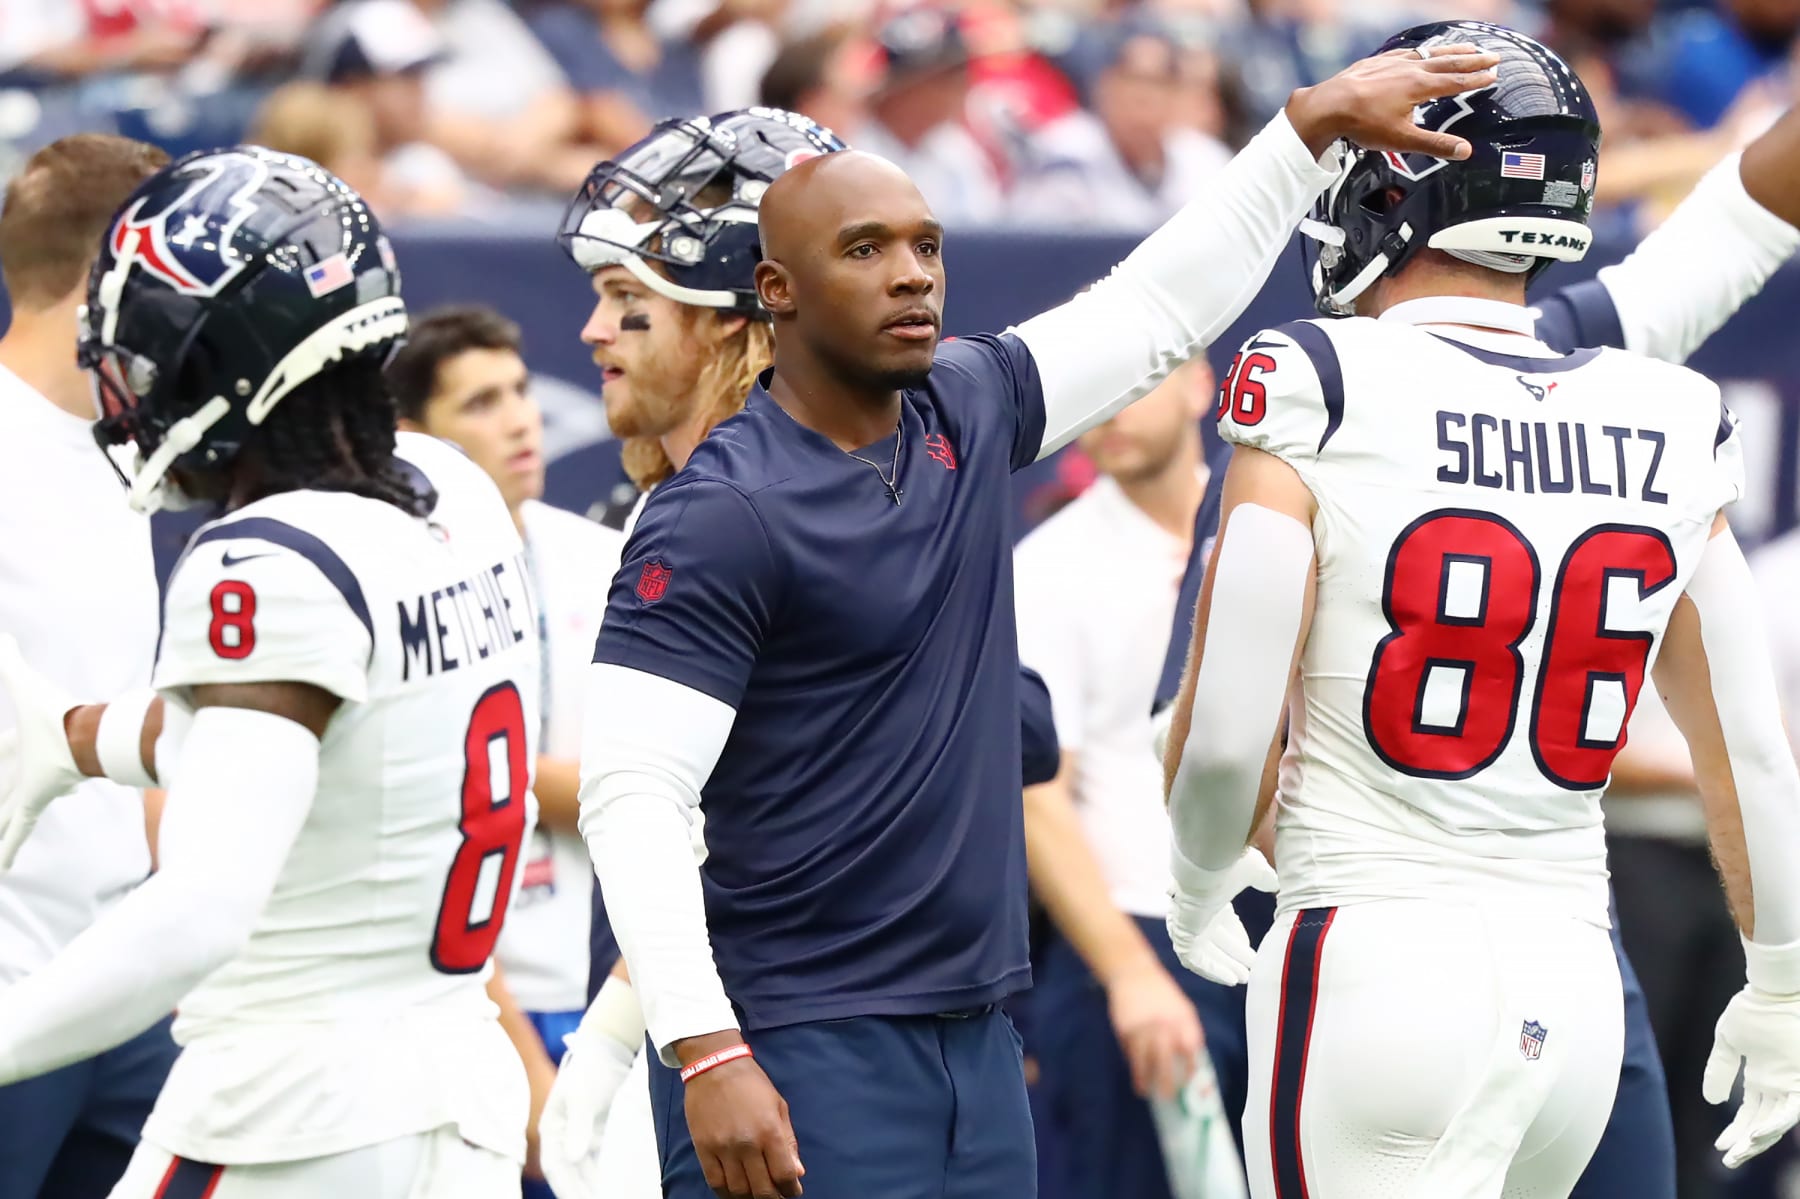 C.J. Stroud happily shocked when Texans followed his selection